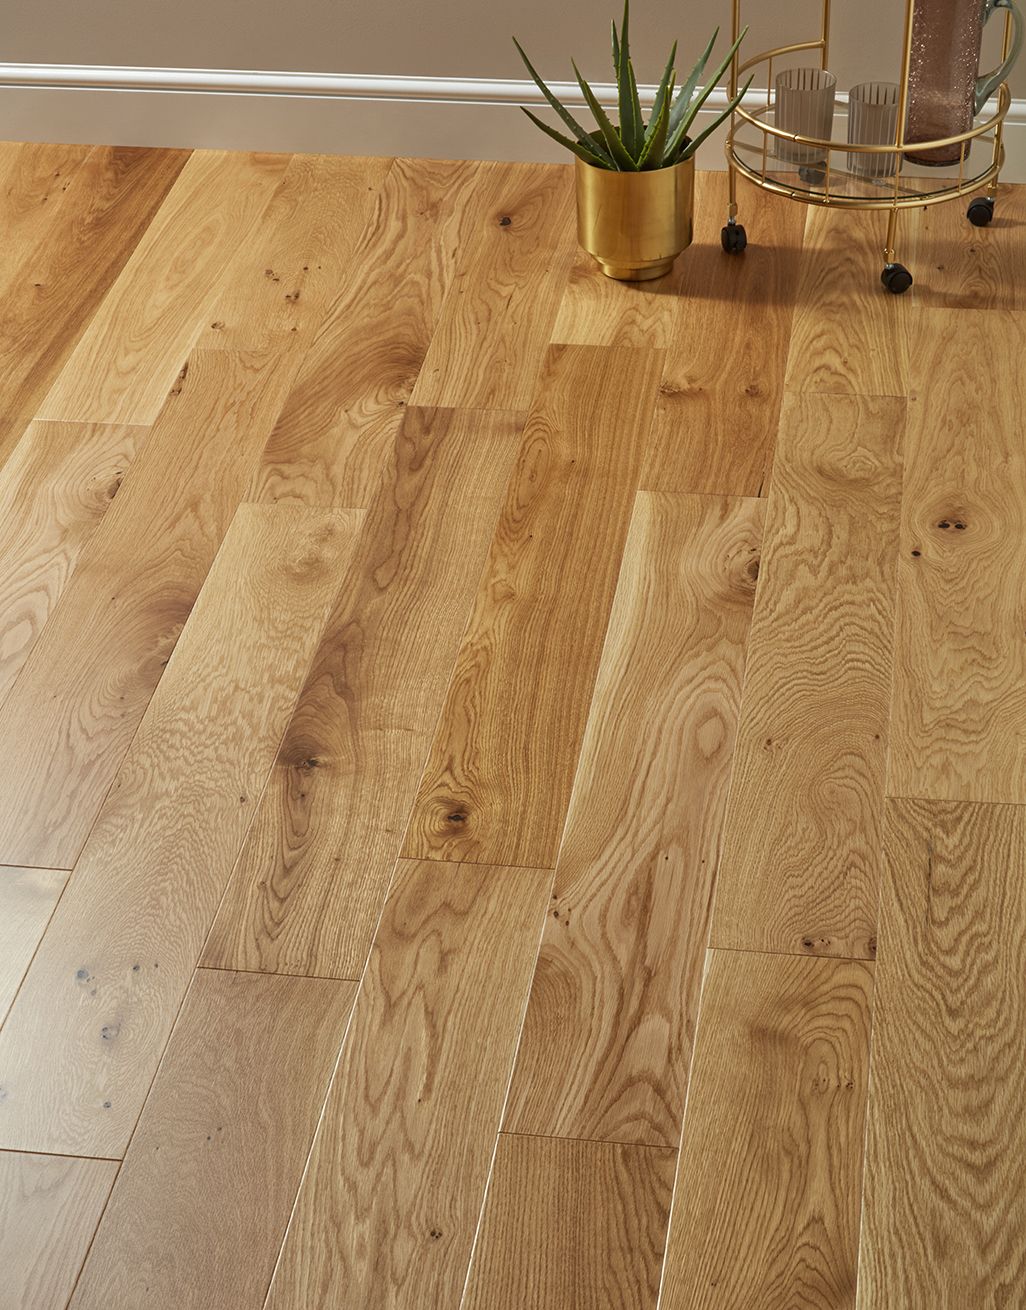 Carpenters Choice Natural 14mm x 155mm Lacquered Engineered Wood Flooring 1